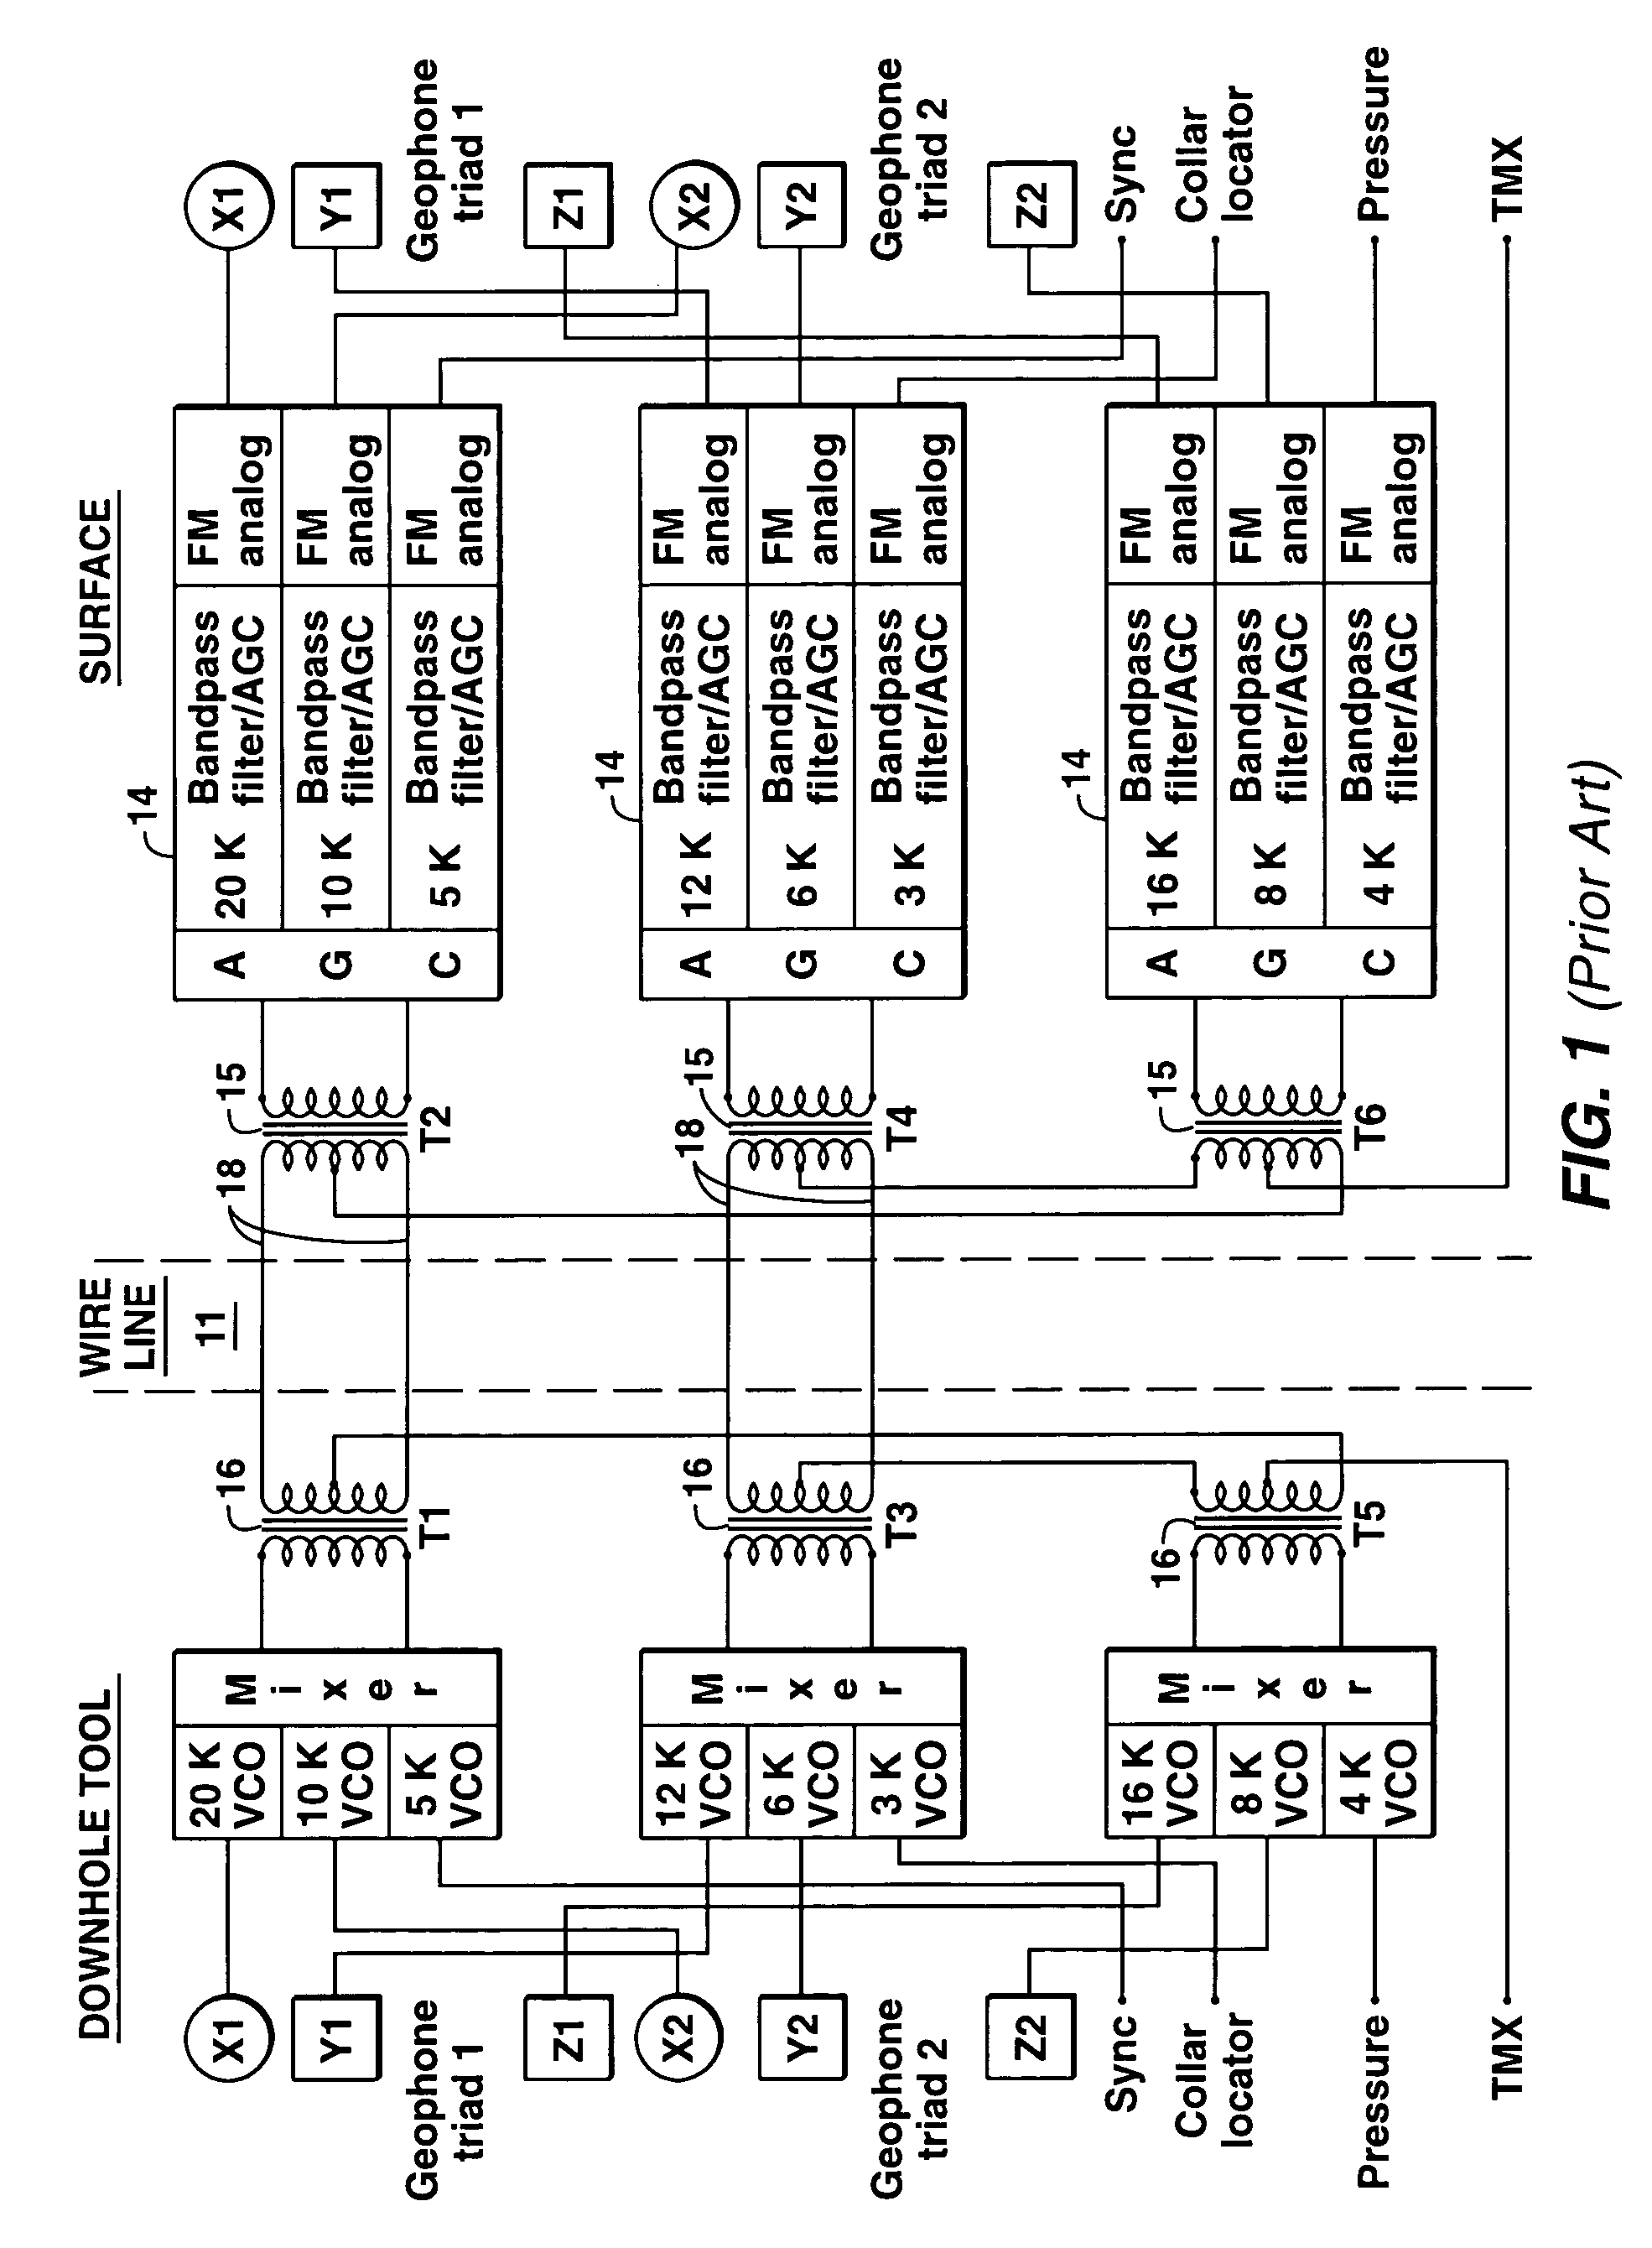 Method and apparatus for using a data telemetry system over multi-conductor wirelines